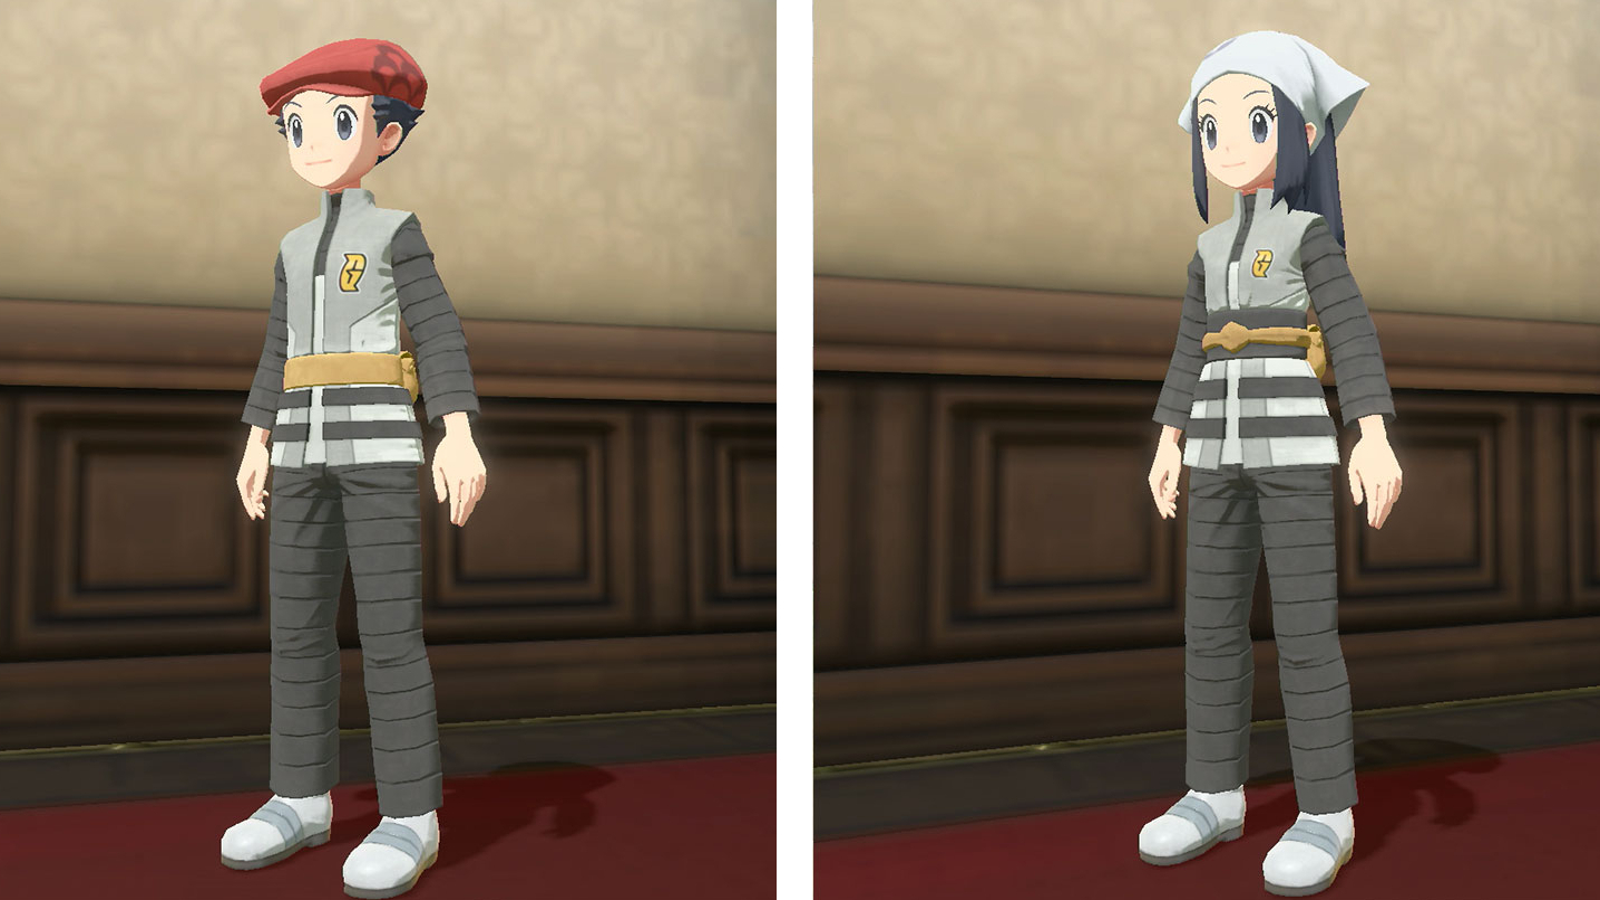 How to change outfits in Pokemon Legends: Arceus